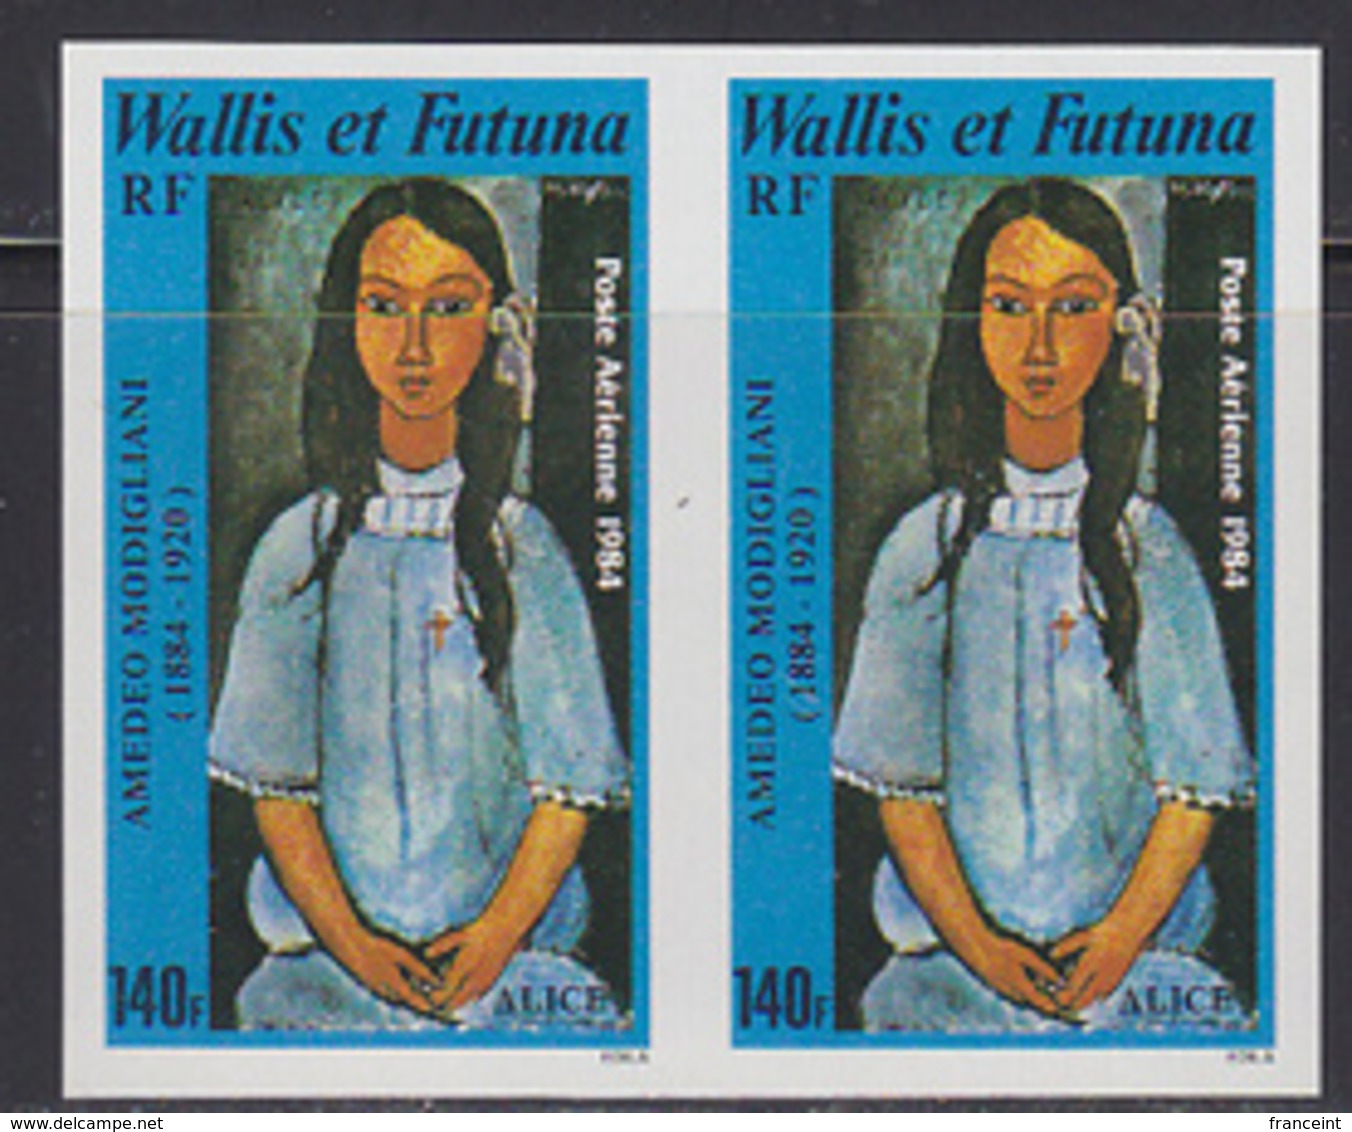 WALLIS & FUTUNA (1984) Portrait Of Alice By Modigliani. Imperforate Pair. Scott No C135, Yvert No PA138. - Imperforates, Proofs & Errors